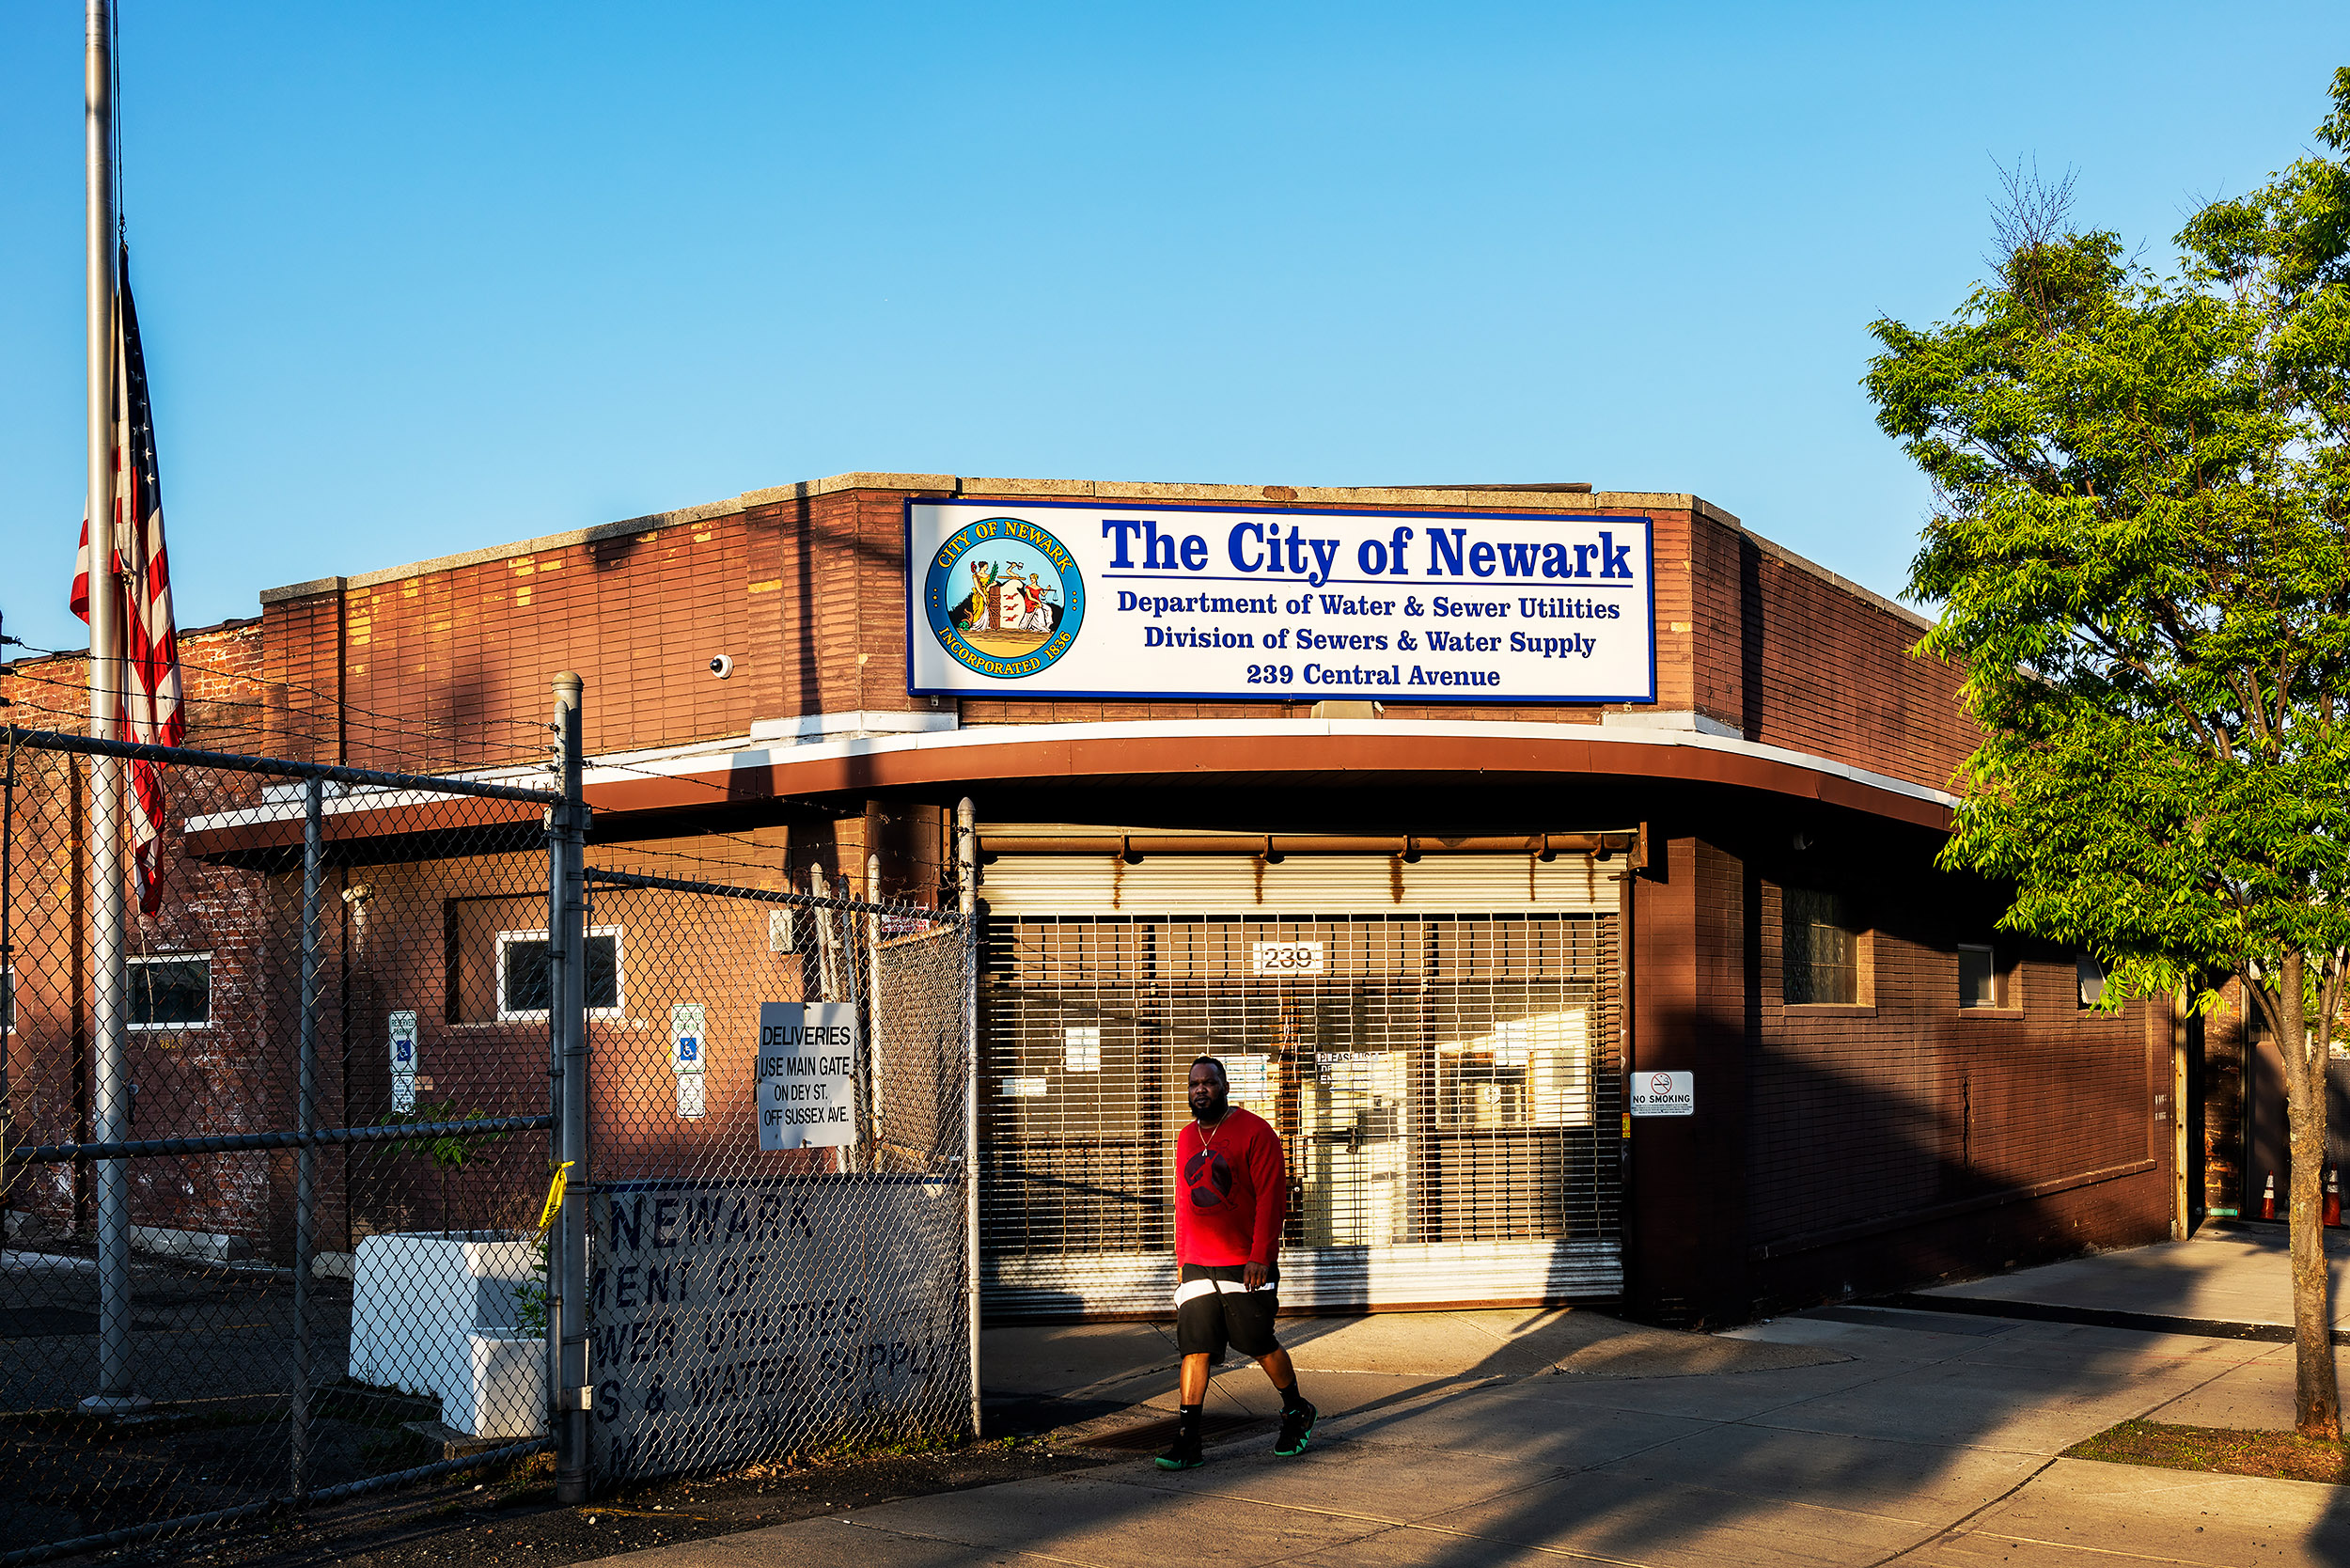  Only certain Newark residents have access to free water filters at limited distribution points. 